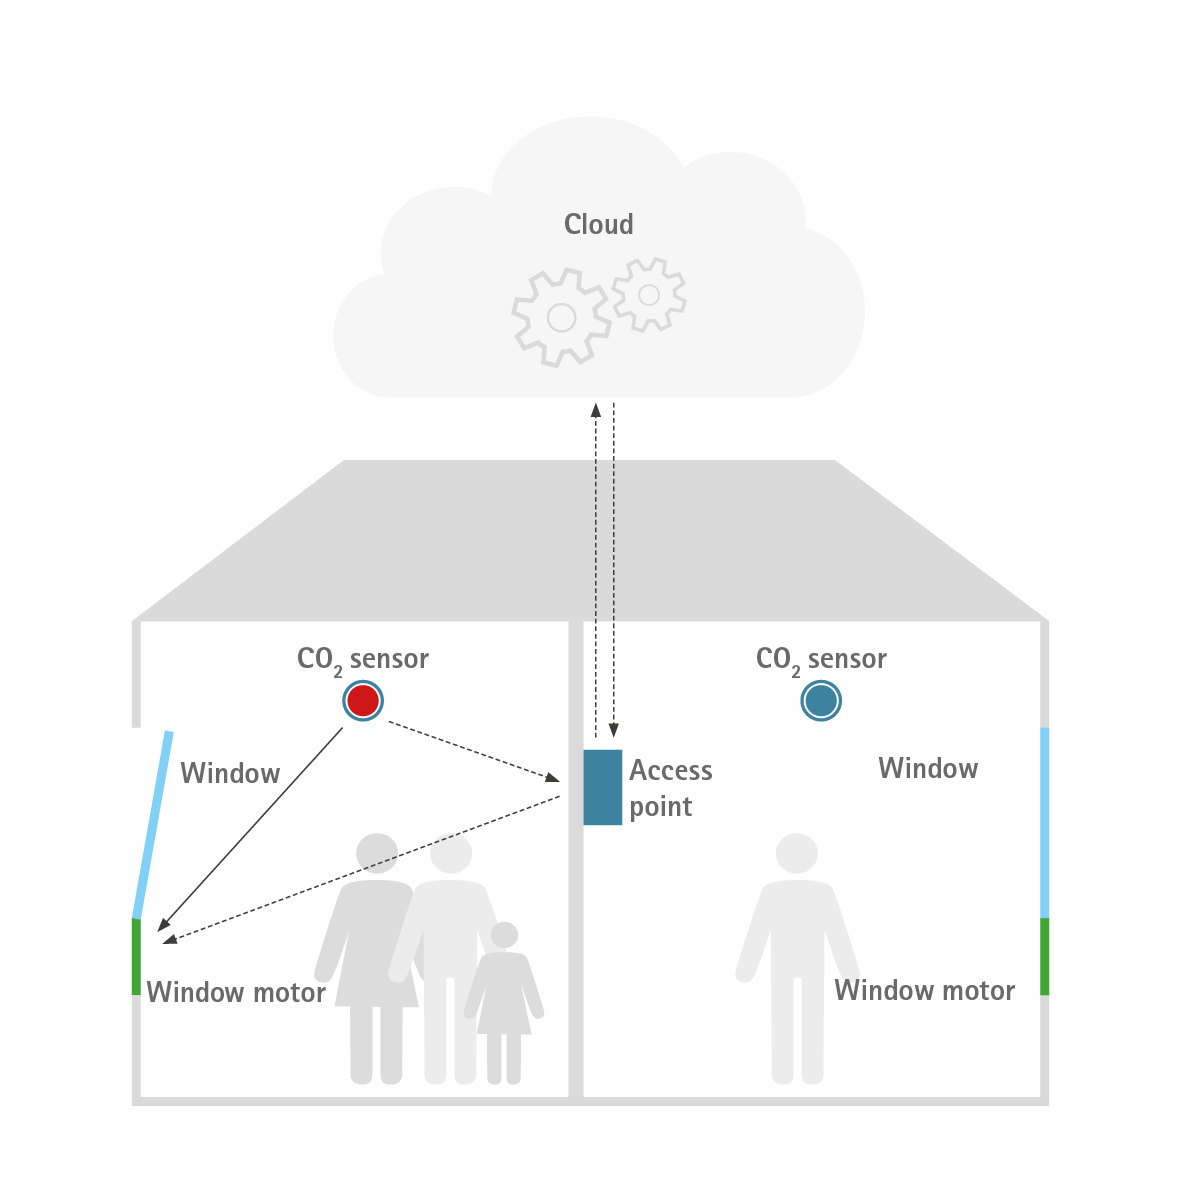 Simple example with a) direct communication between CO2 sensor and window motor and b) signal flow via access point and cloud